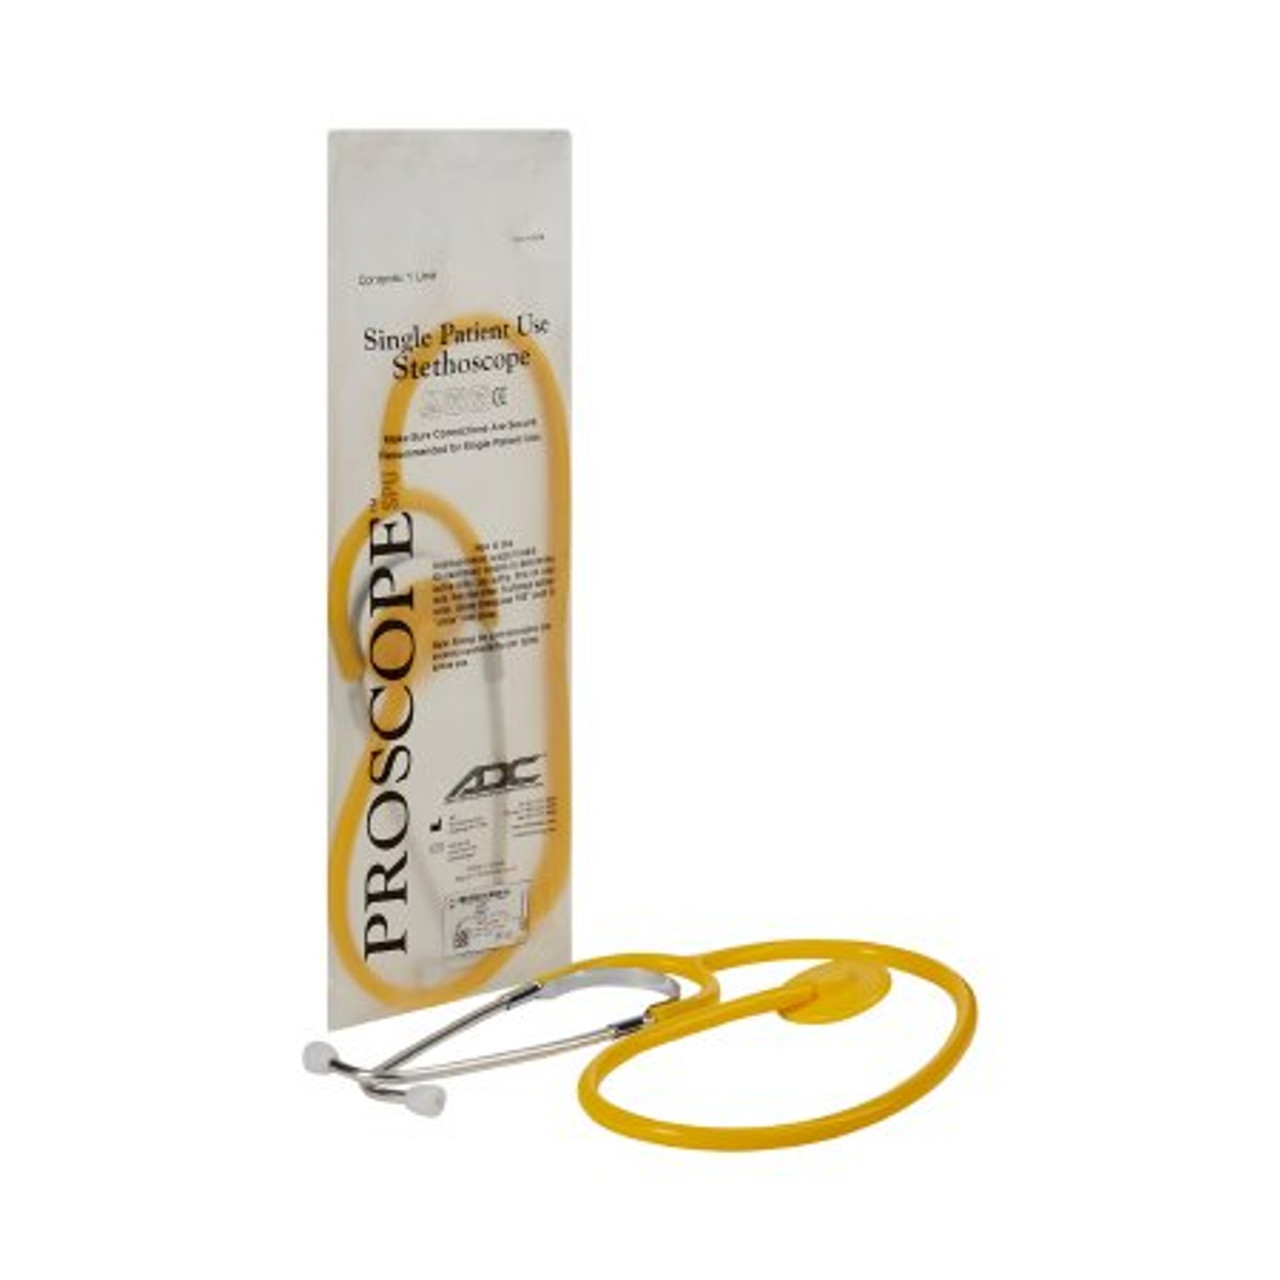 ADC Disposable Proscope Stethoscope, Yellow, 1 Tube, 22 inch, Single Head Chestpiece, Case of 50